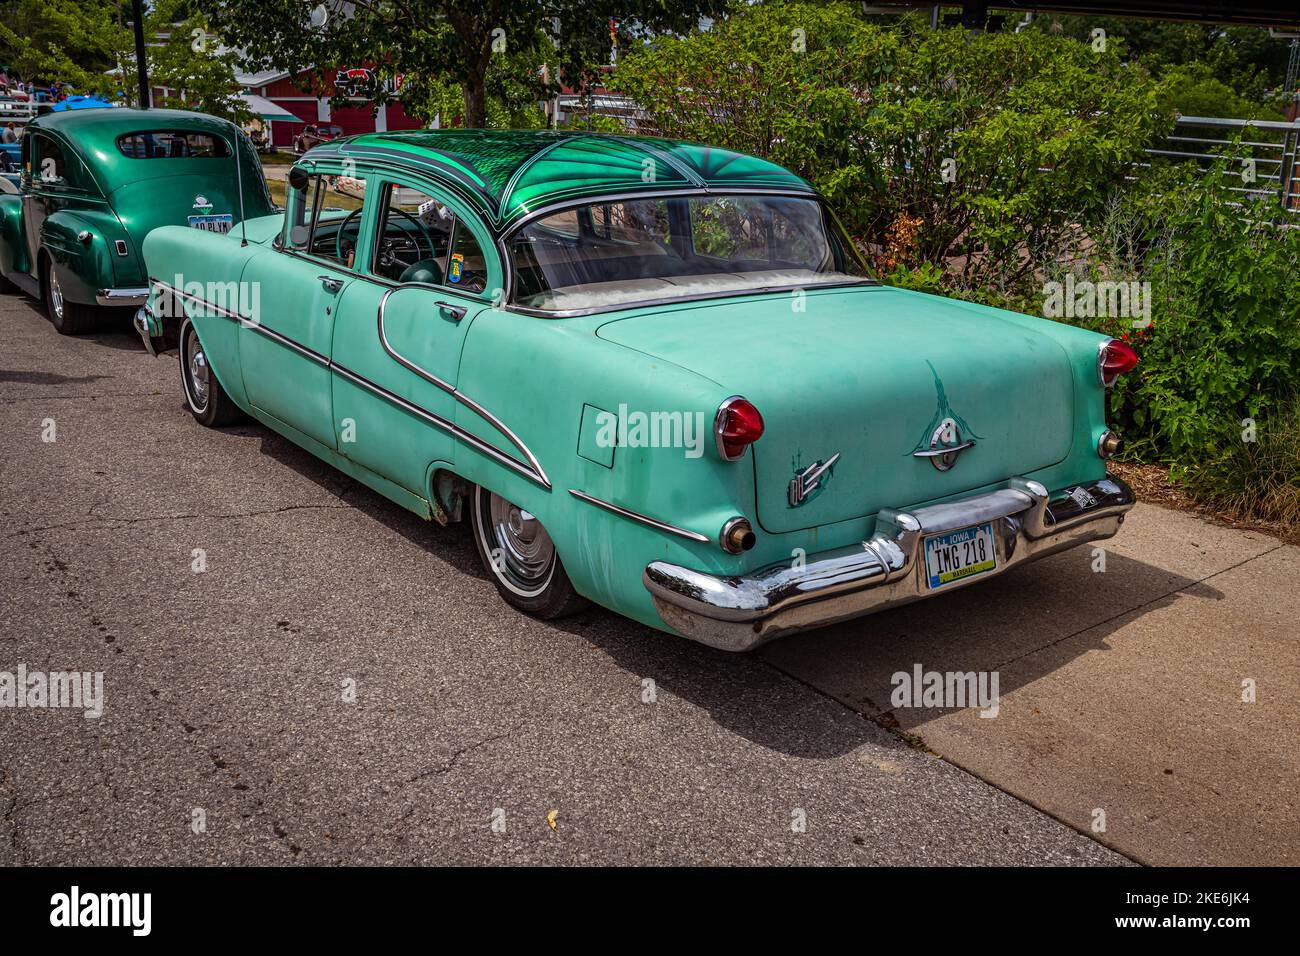 Des Moines, IA - July 02, 2022: High perspective rear corner view of a 1955 Oldsmobile 88 4 Door Sedan at a local car show. Stock Photo